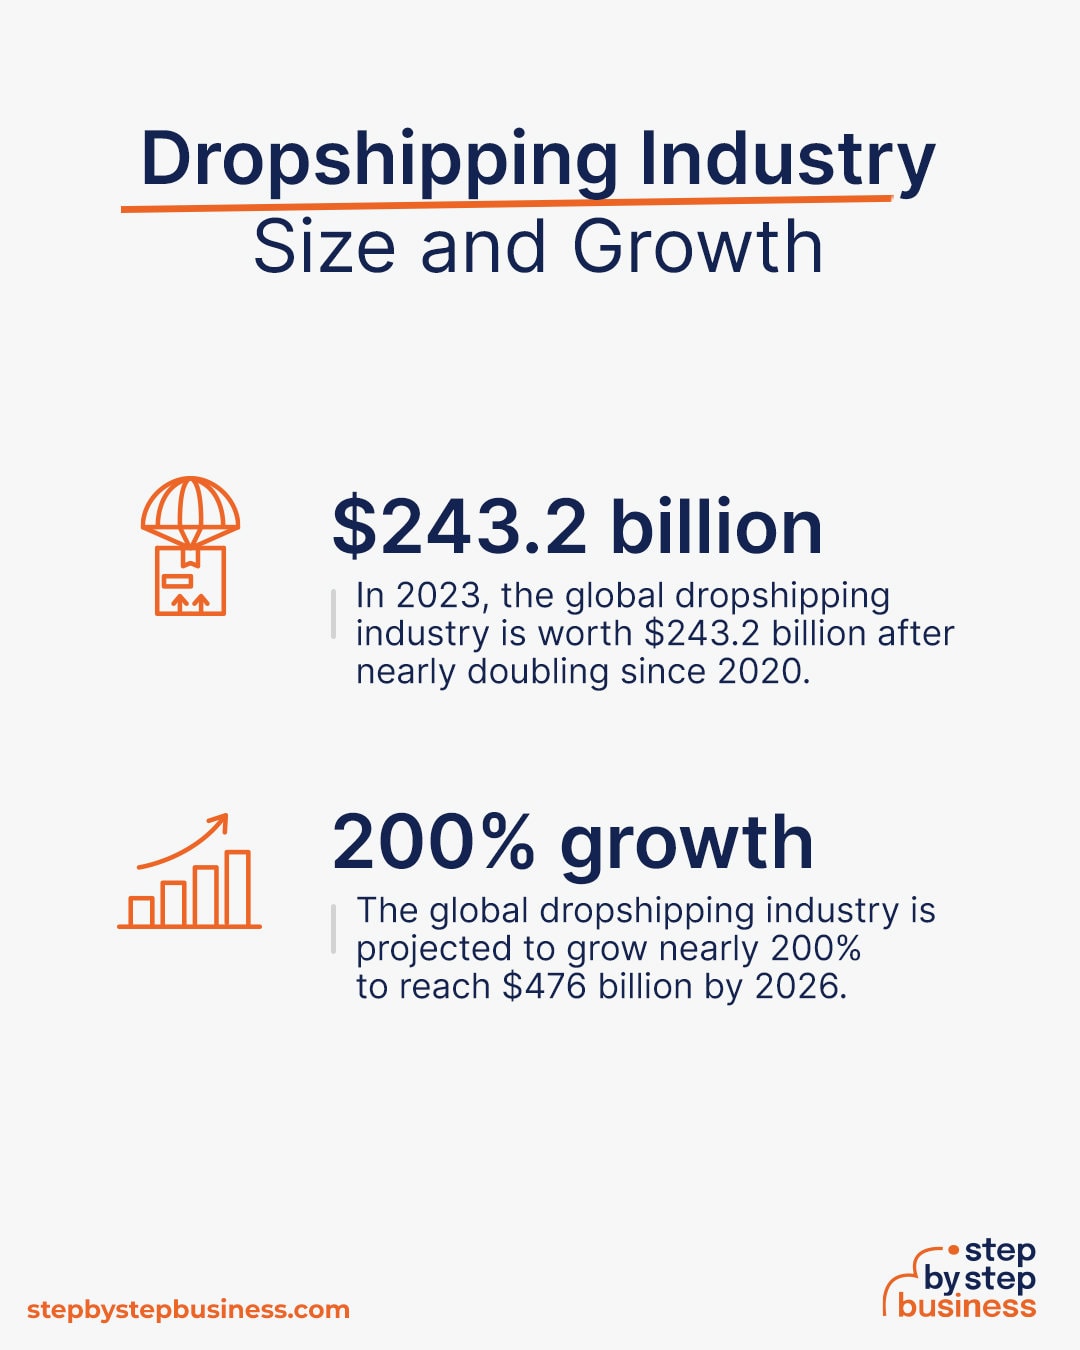 Dropshipping industry size and growth